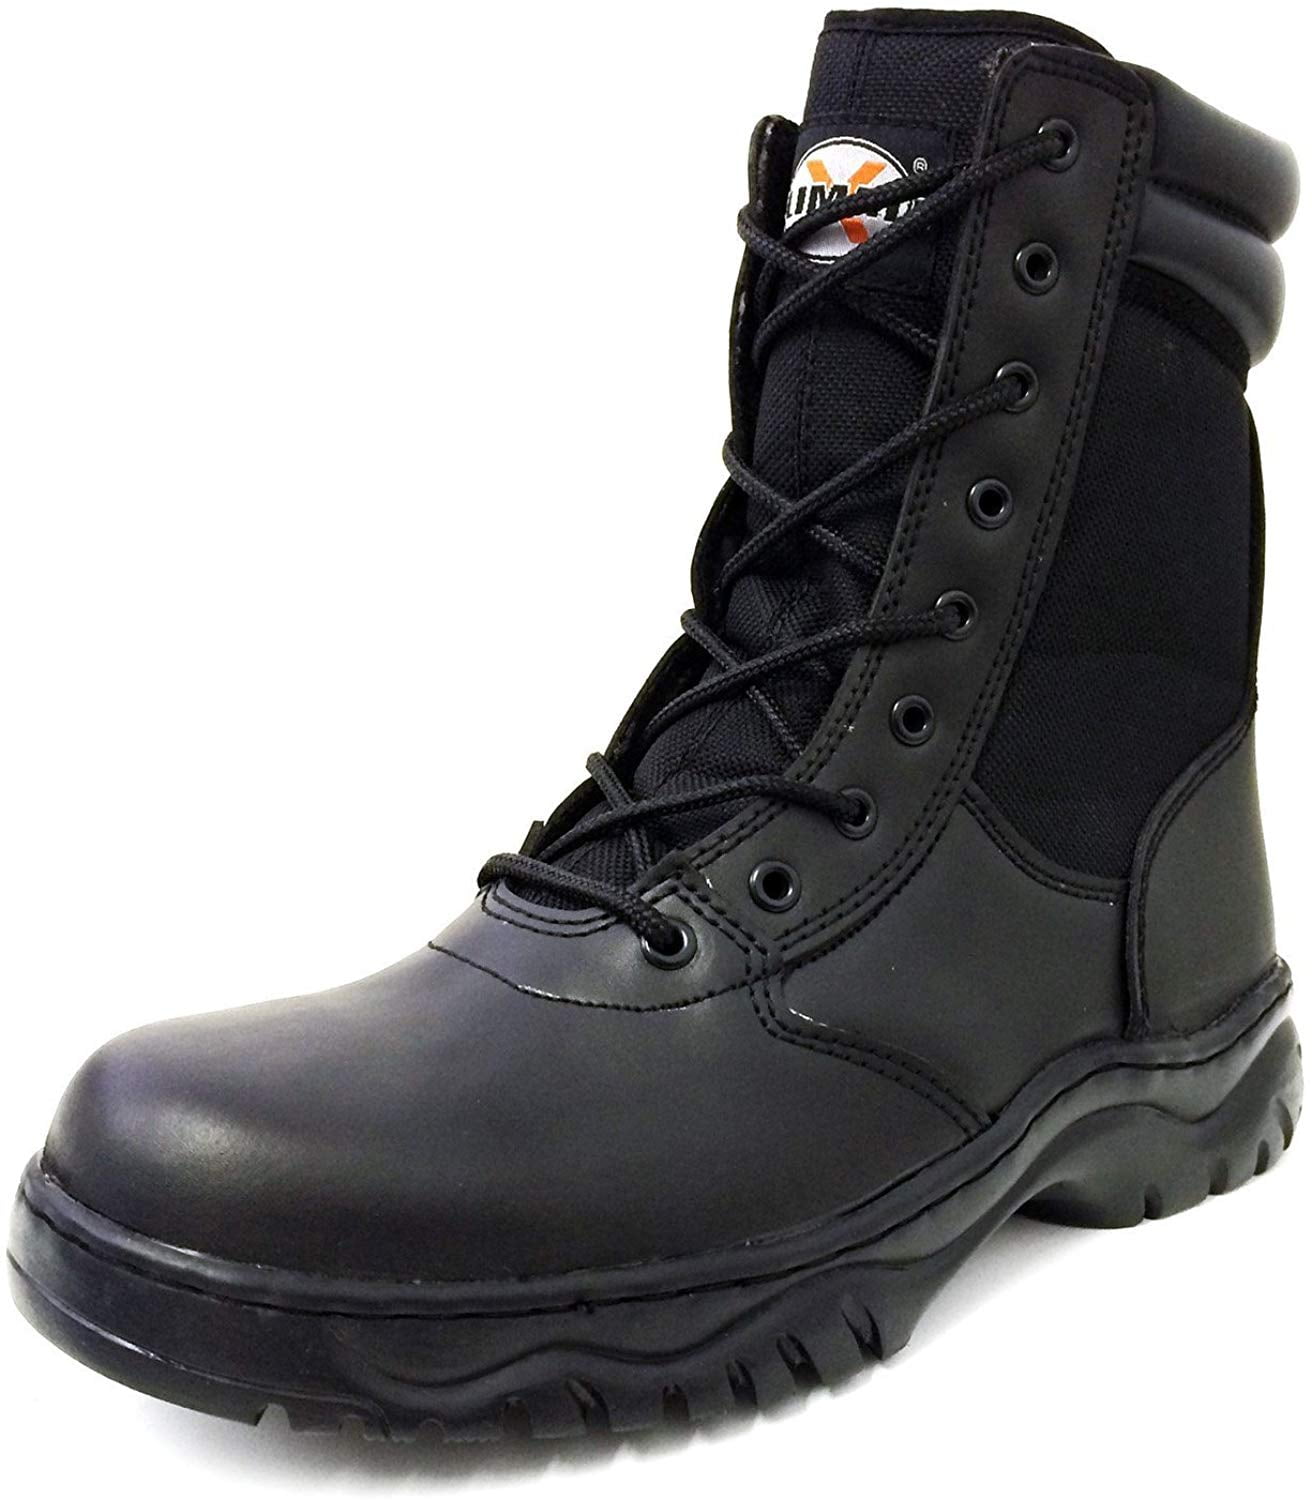 Men's Work Safety Shoes Steel Toe Military Tactical Boots 